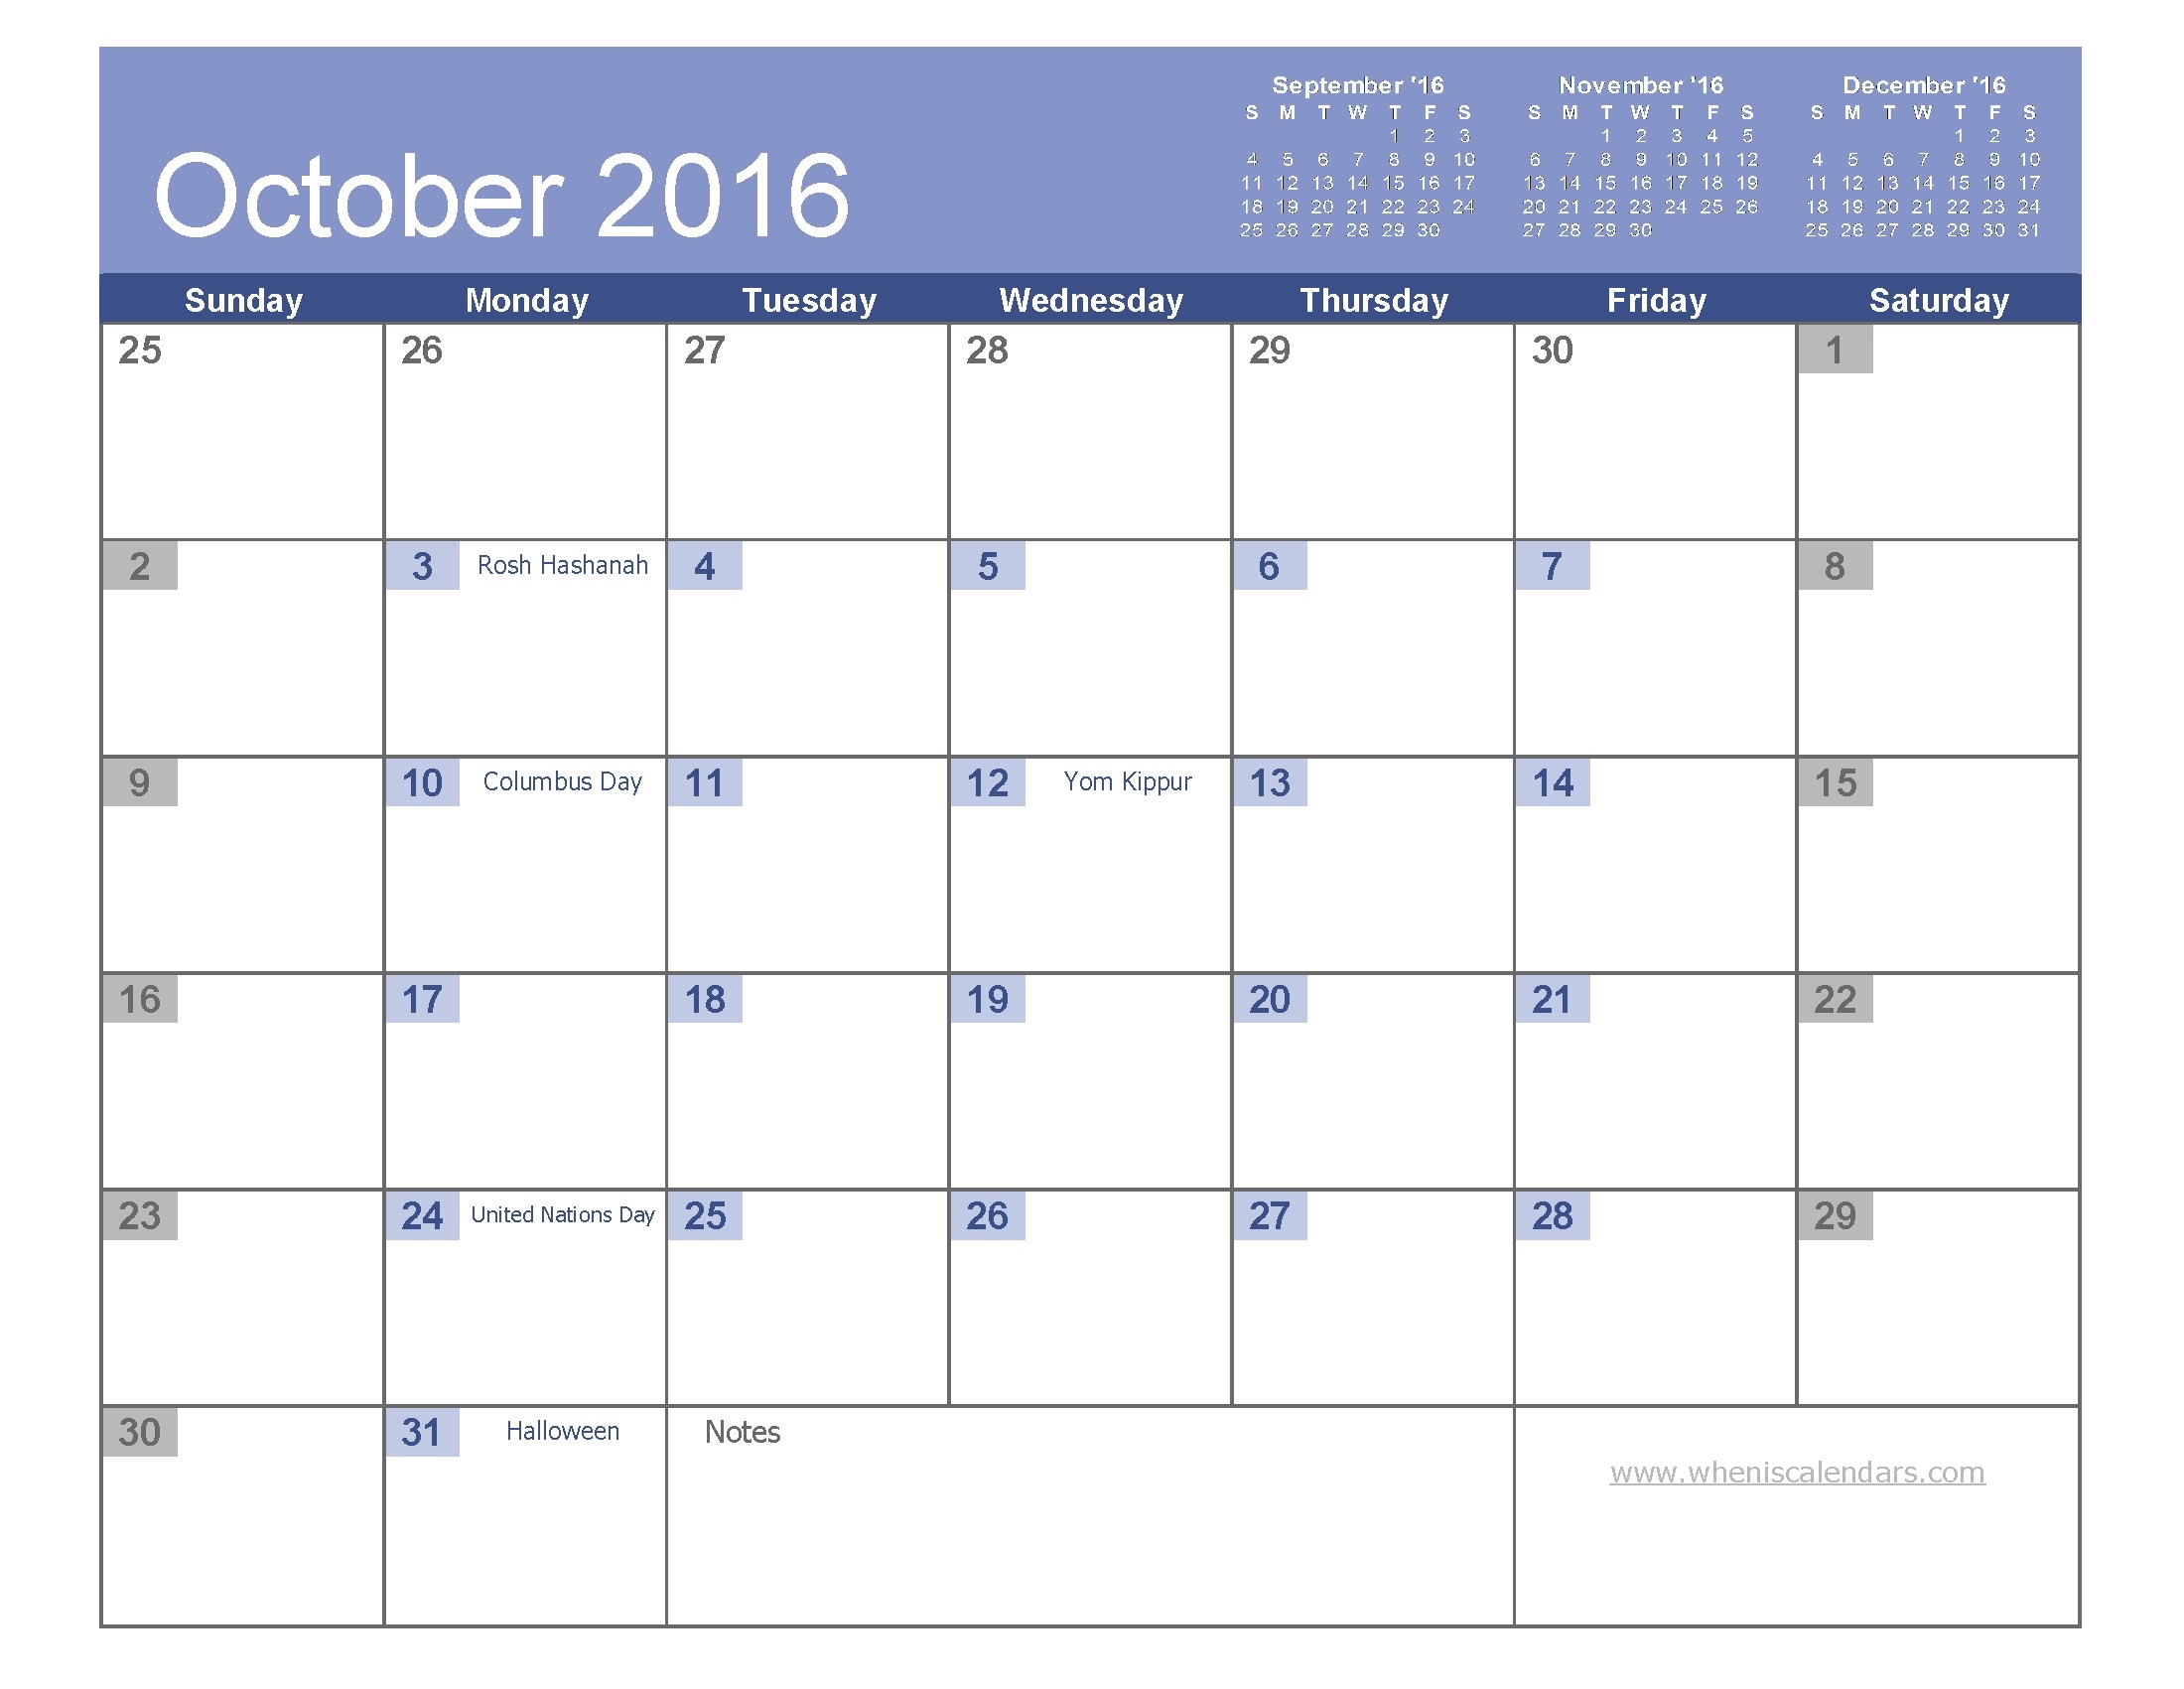 October 2016 Calendar With Jewish Holidays | Jcreview-Jewish Holidays In Oct